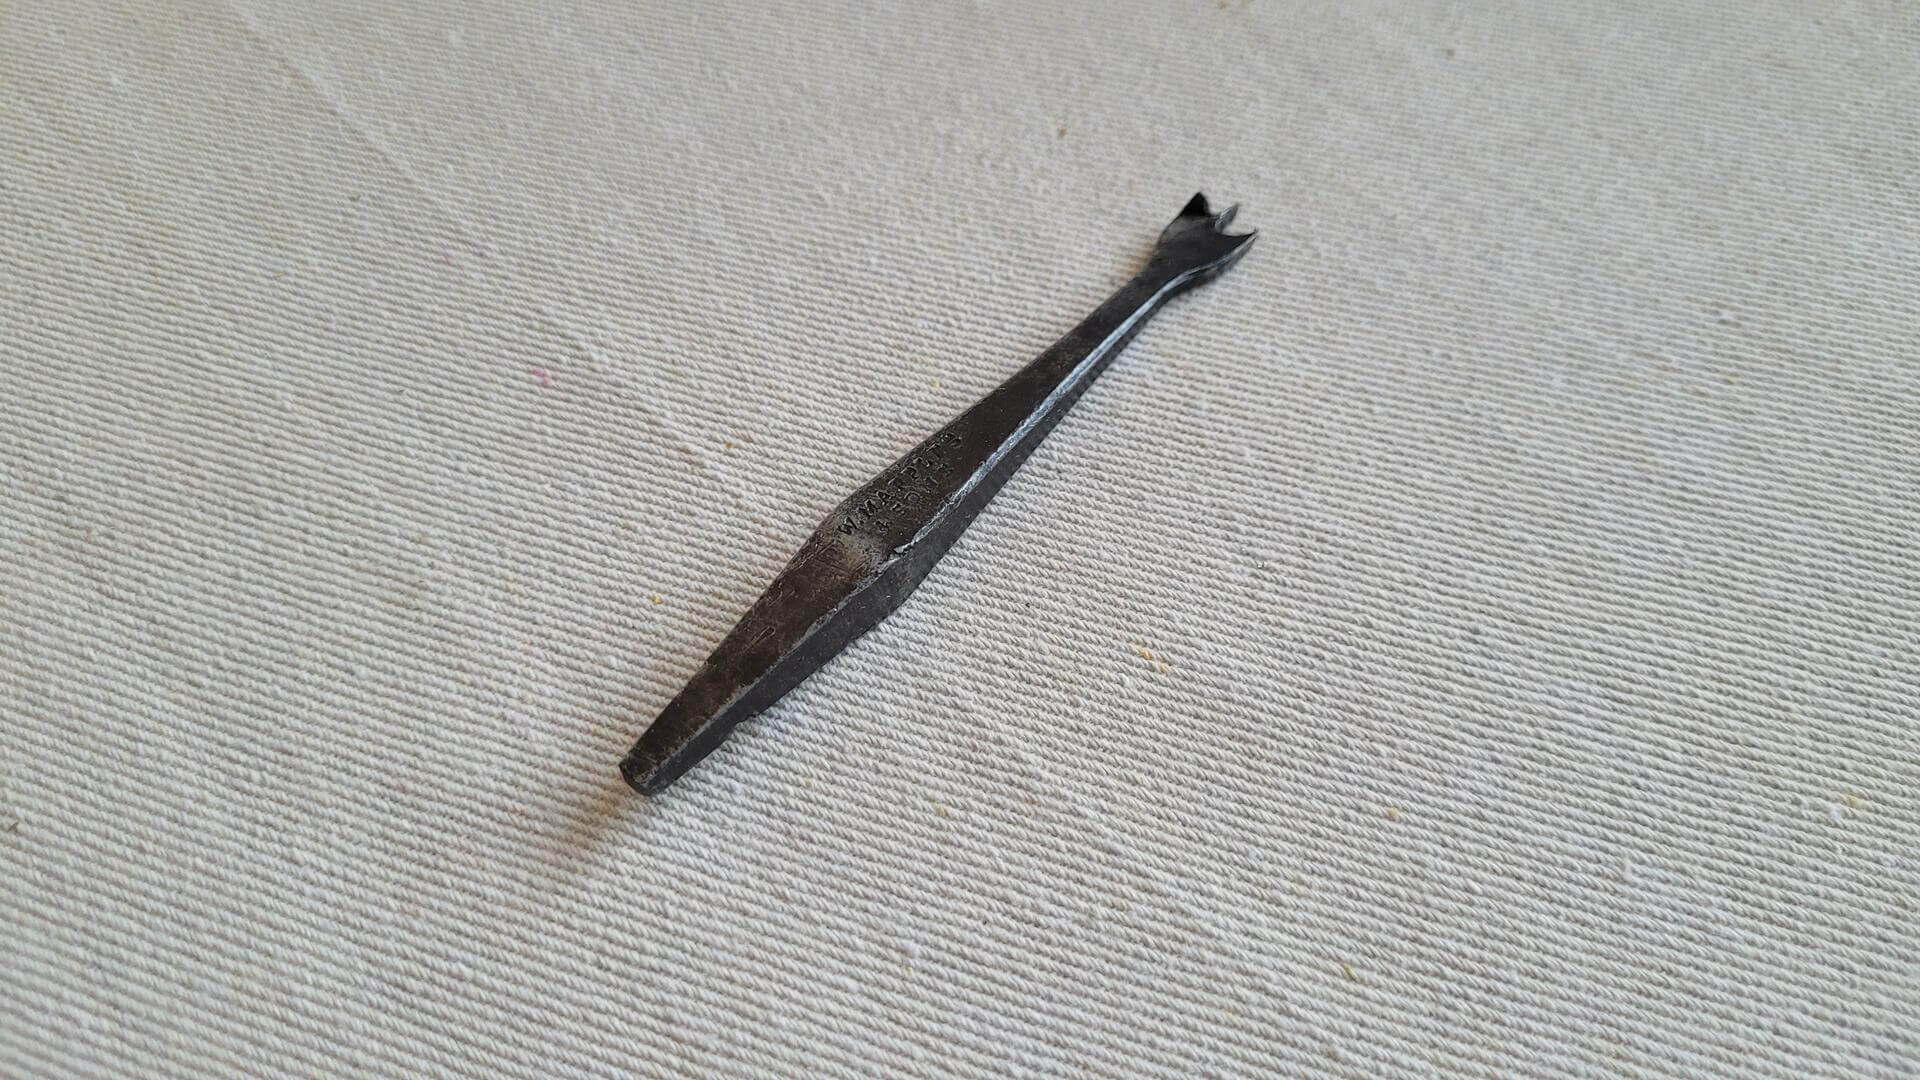 Rare antique W. Marples & Sons batwing style drill bit for brace. Vintage made in England collectible carpentry, woodworking, and cabinet maker tools.